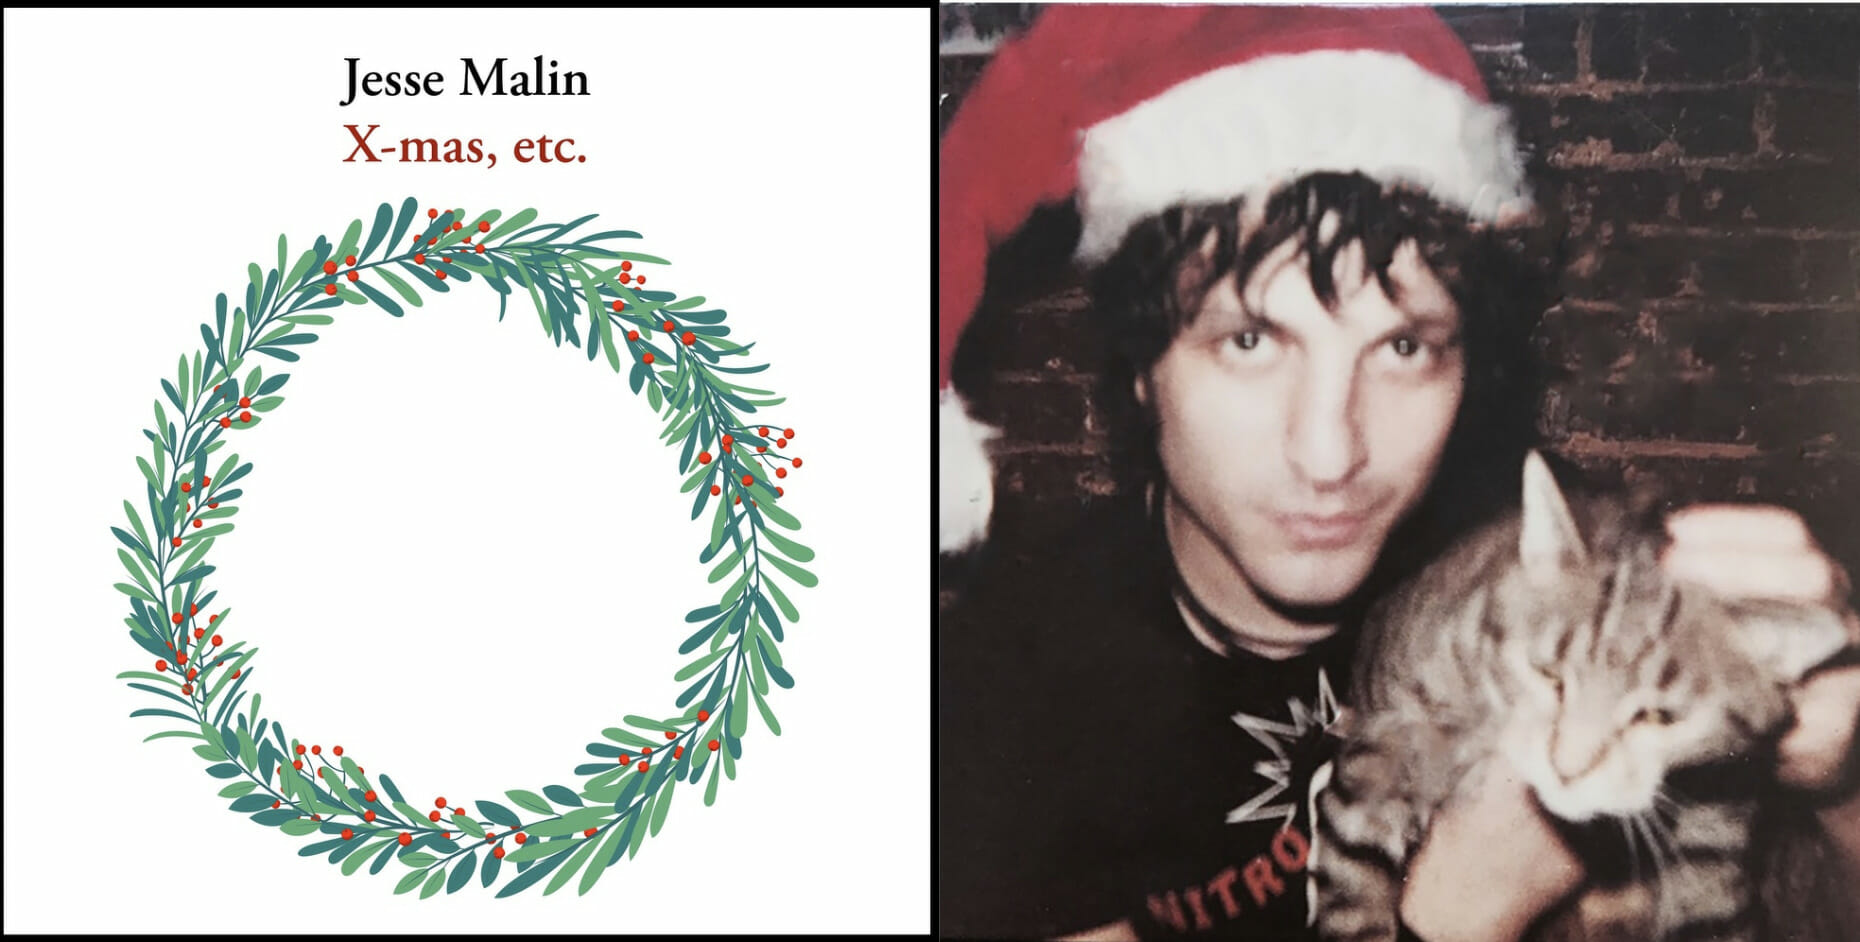 Jesse Malin Shares New Video for “Xmas, etc.” in Celebration of